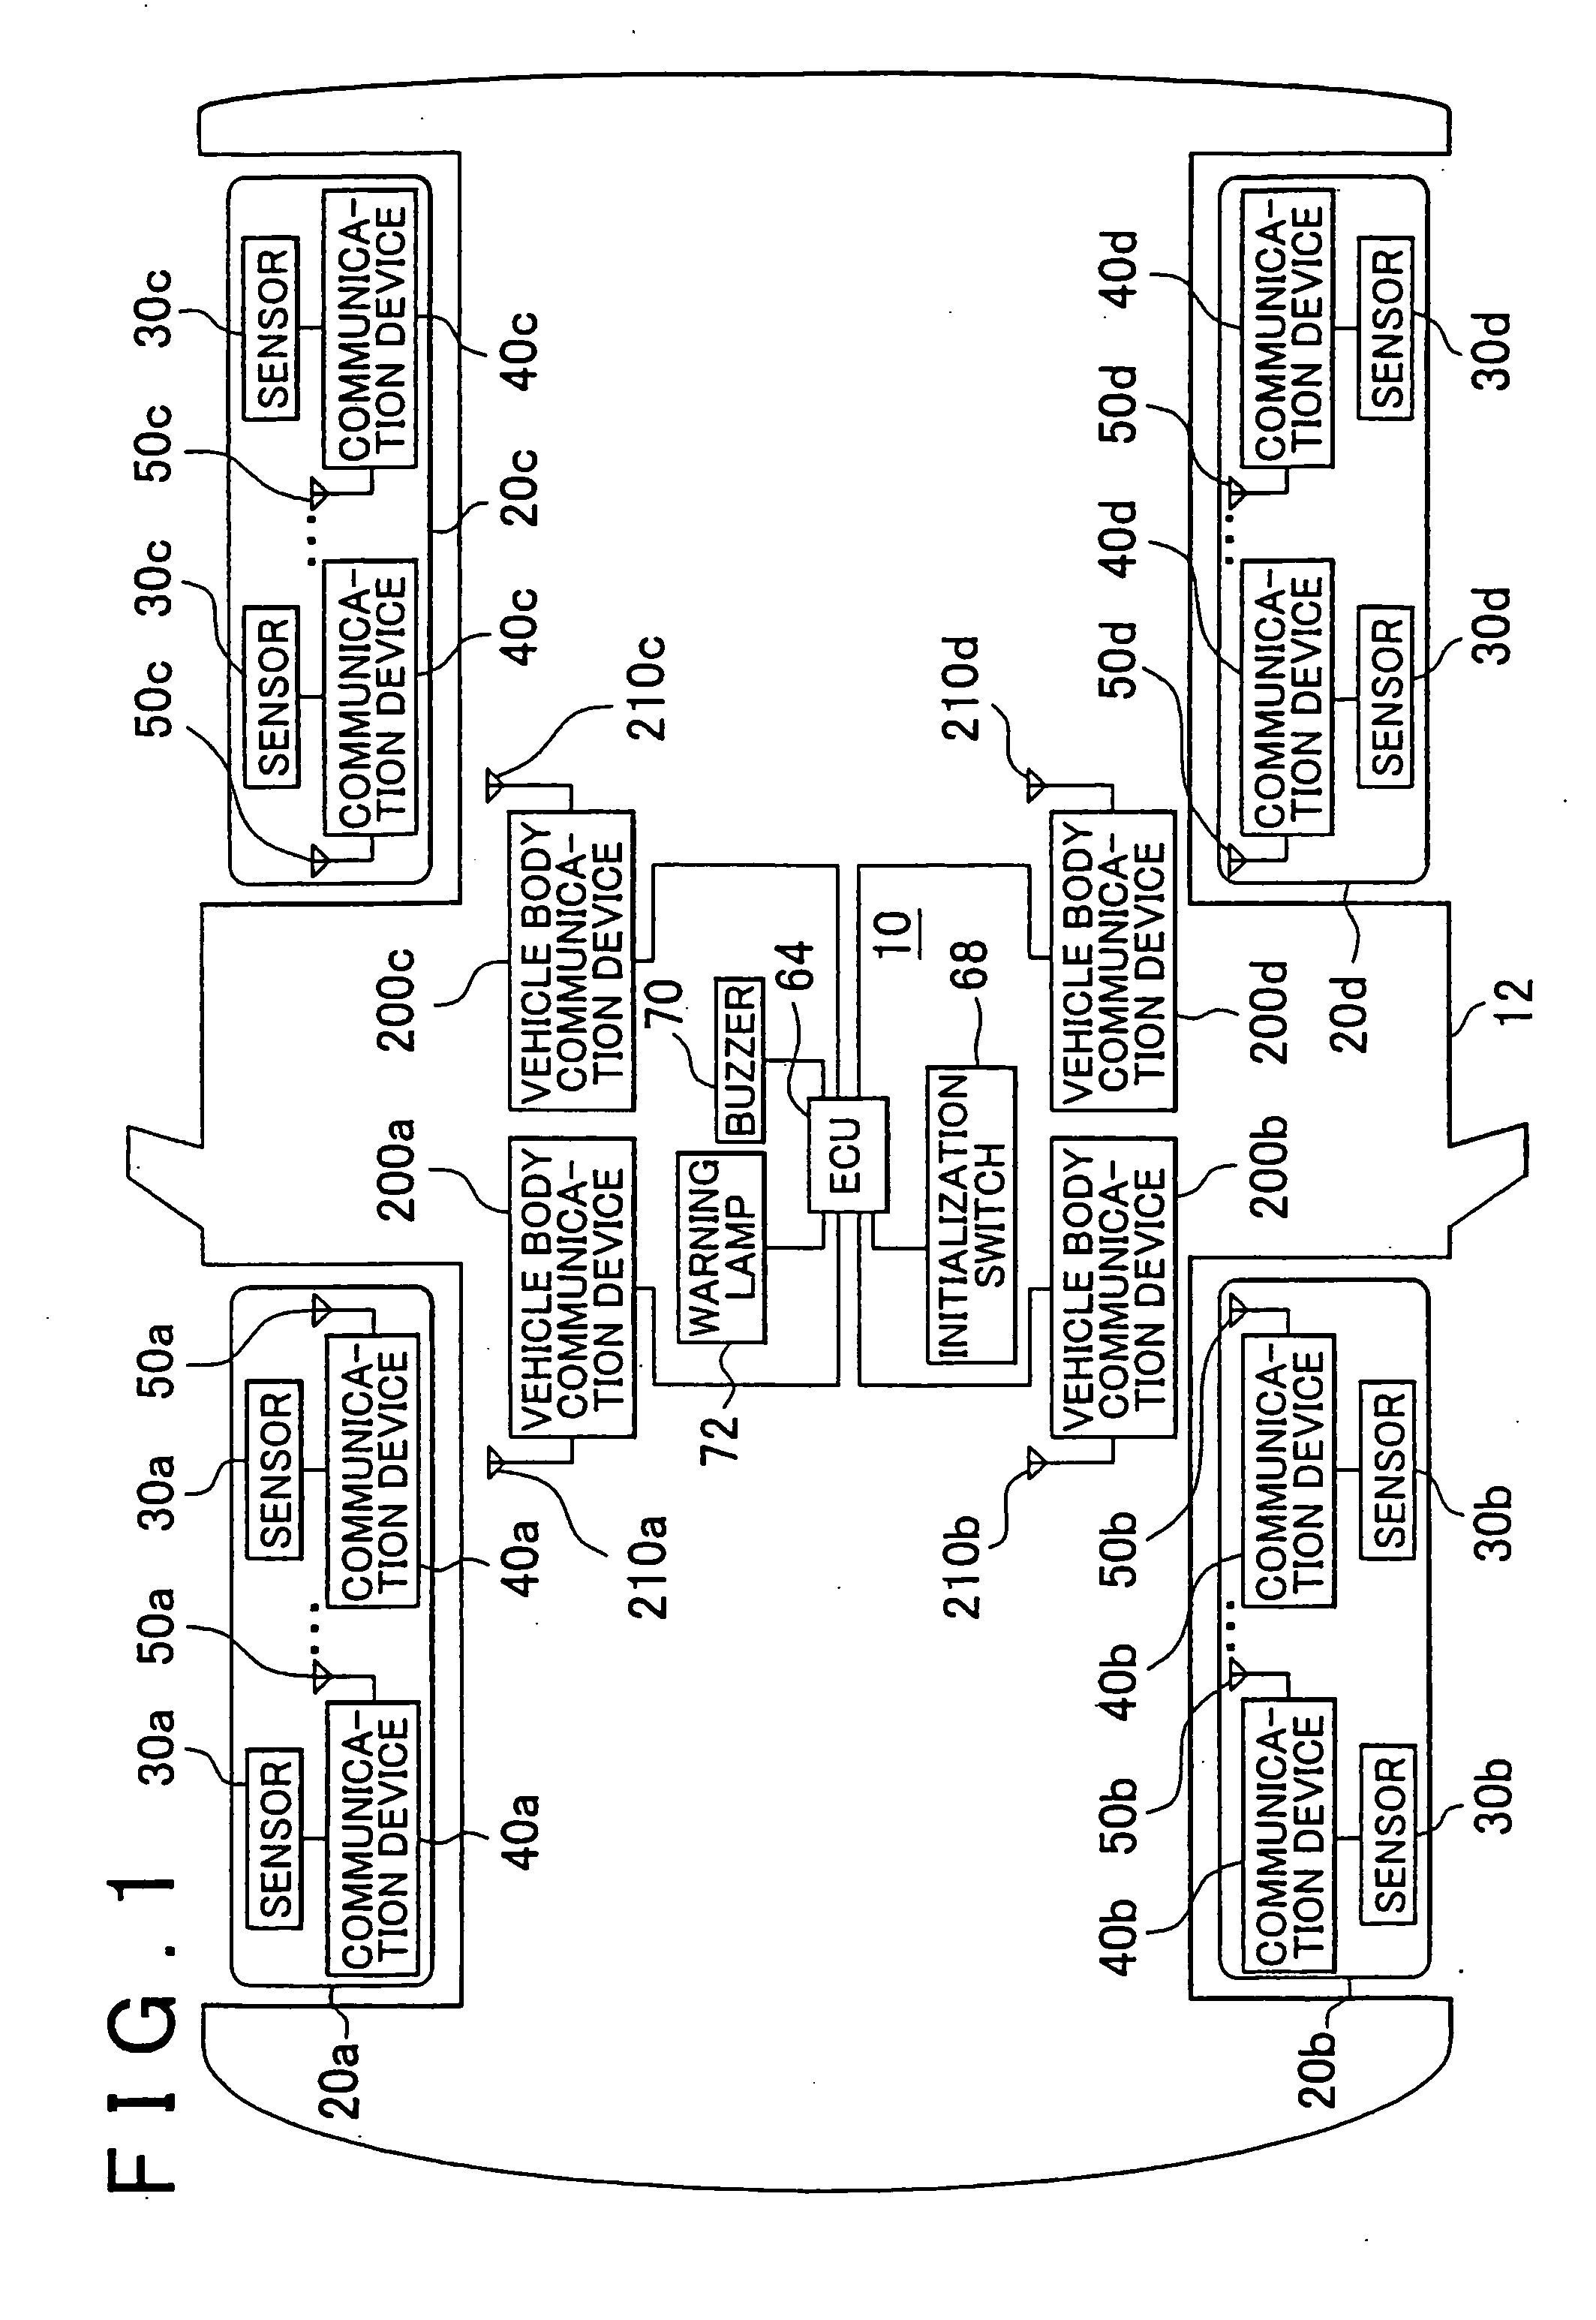 Vehicle wheel information processing device and method therefor